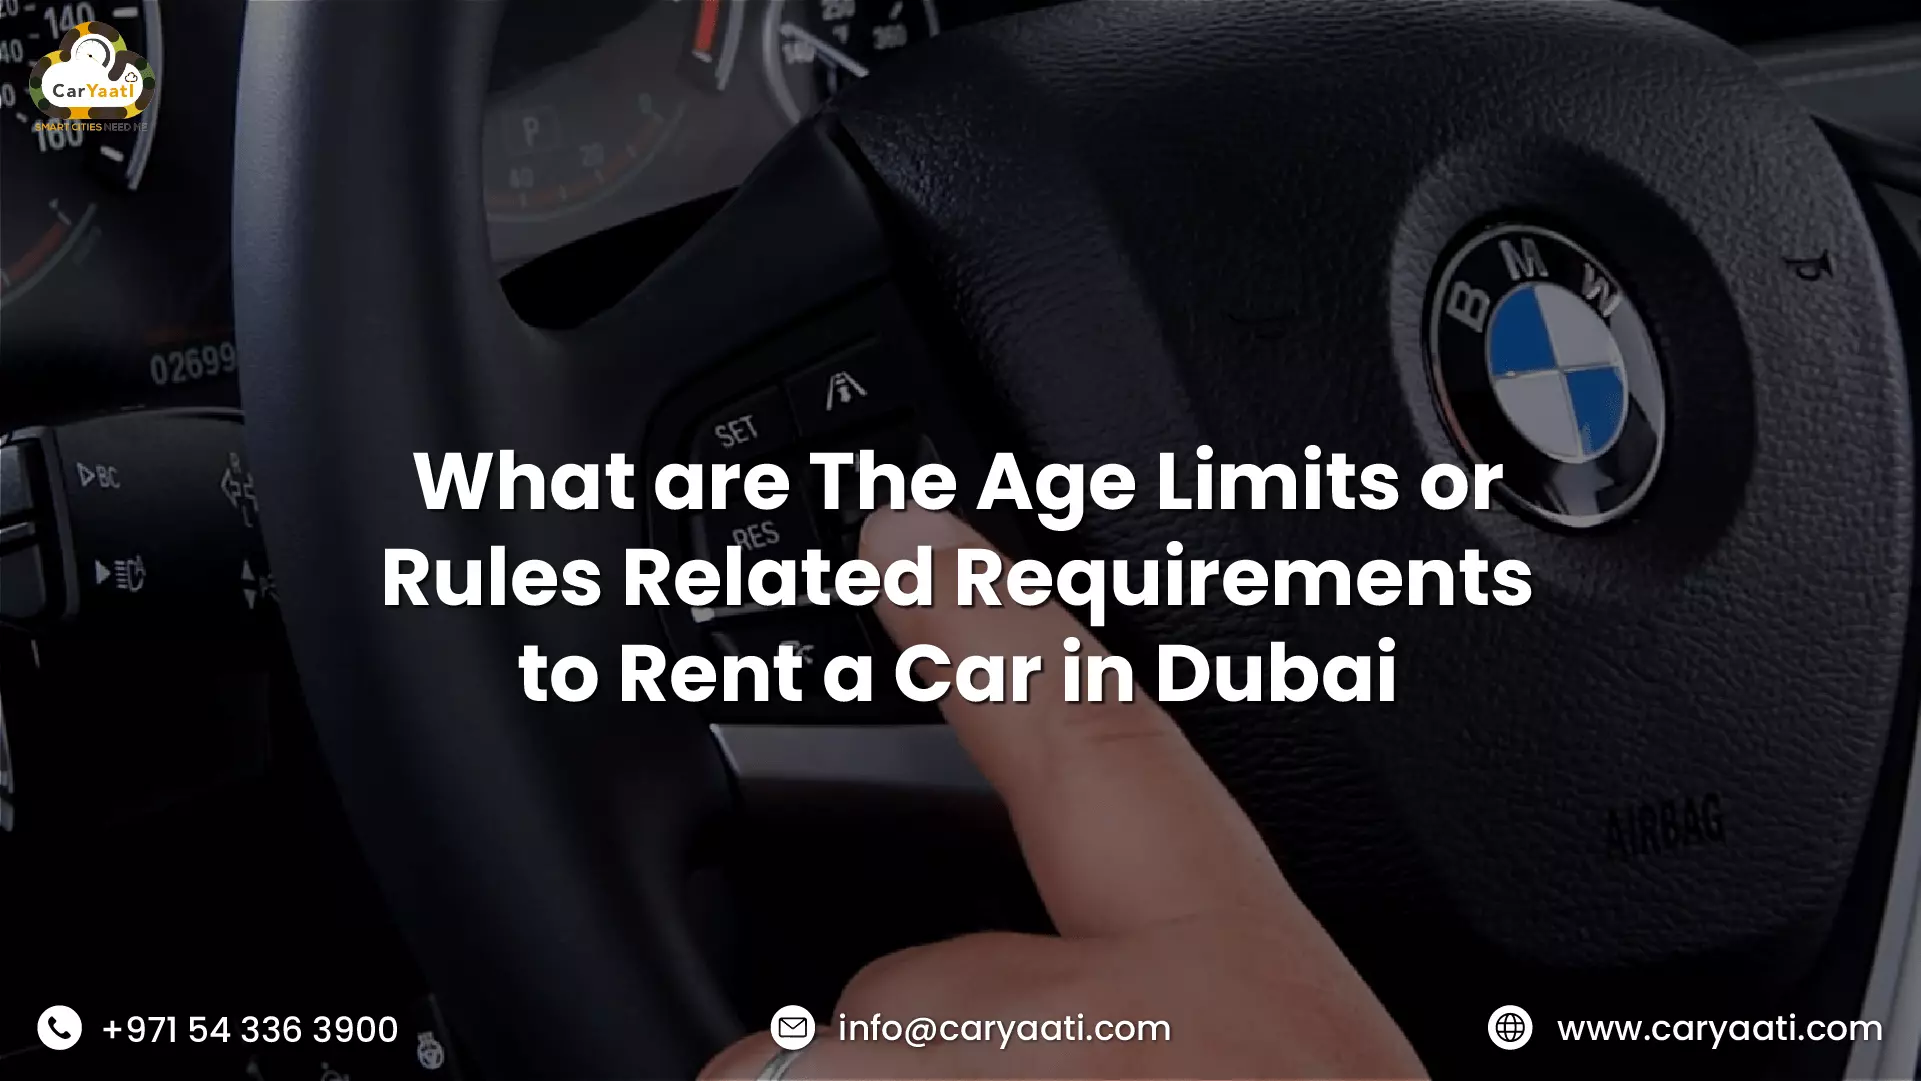 What are The Age Limits or Rules Related Requirements to Rent a Car in Dubai?